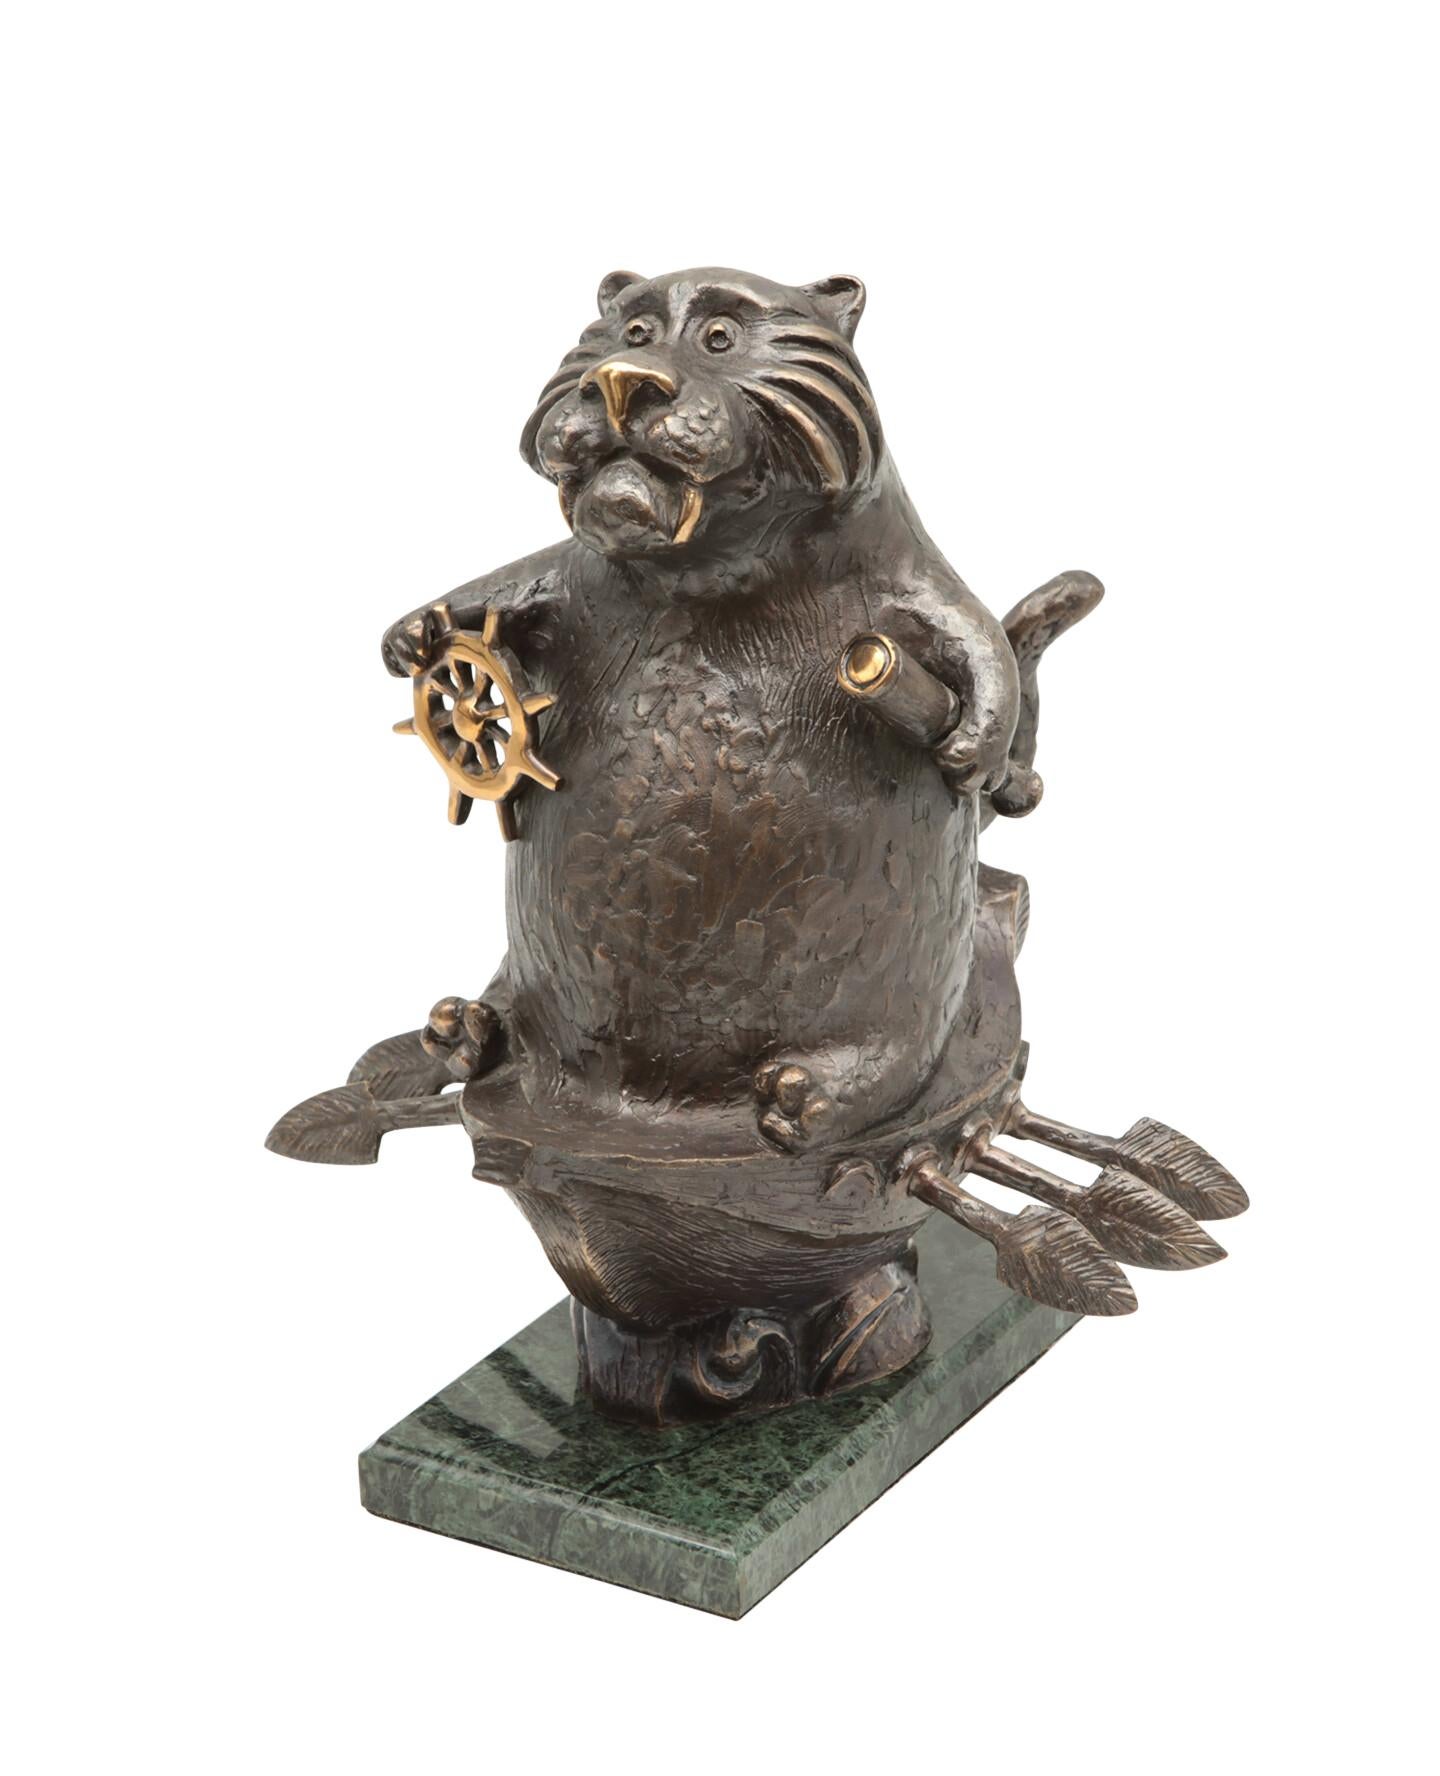 Volodymyr Mykytenko - Traveler (2010)

Traveler - my tiger travels the world in a boat, the holds of his boat are full, he is cheerful and all his wishes come true.

Additional information:
Medium: Bronze, Stone
Dimensions: 23 W x 23 D x 28 H cm